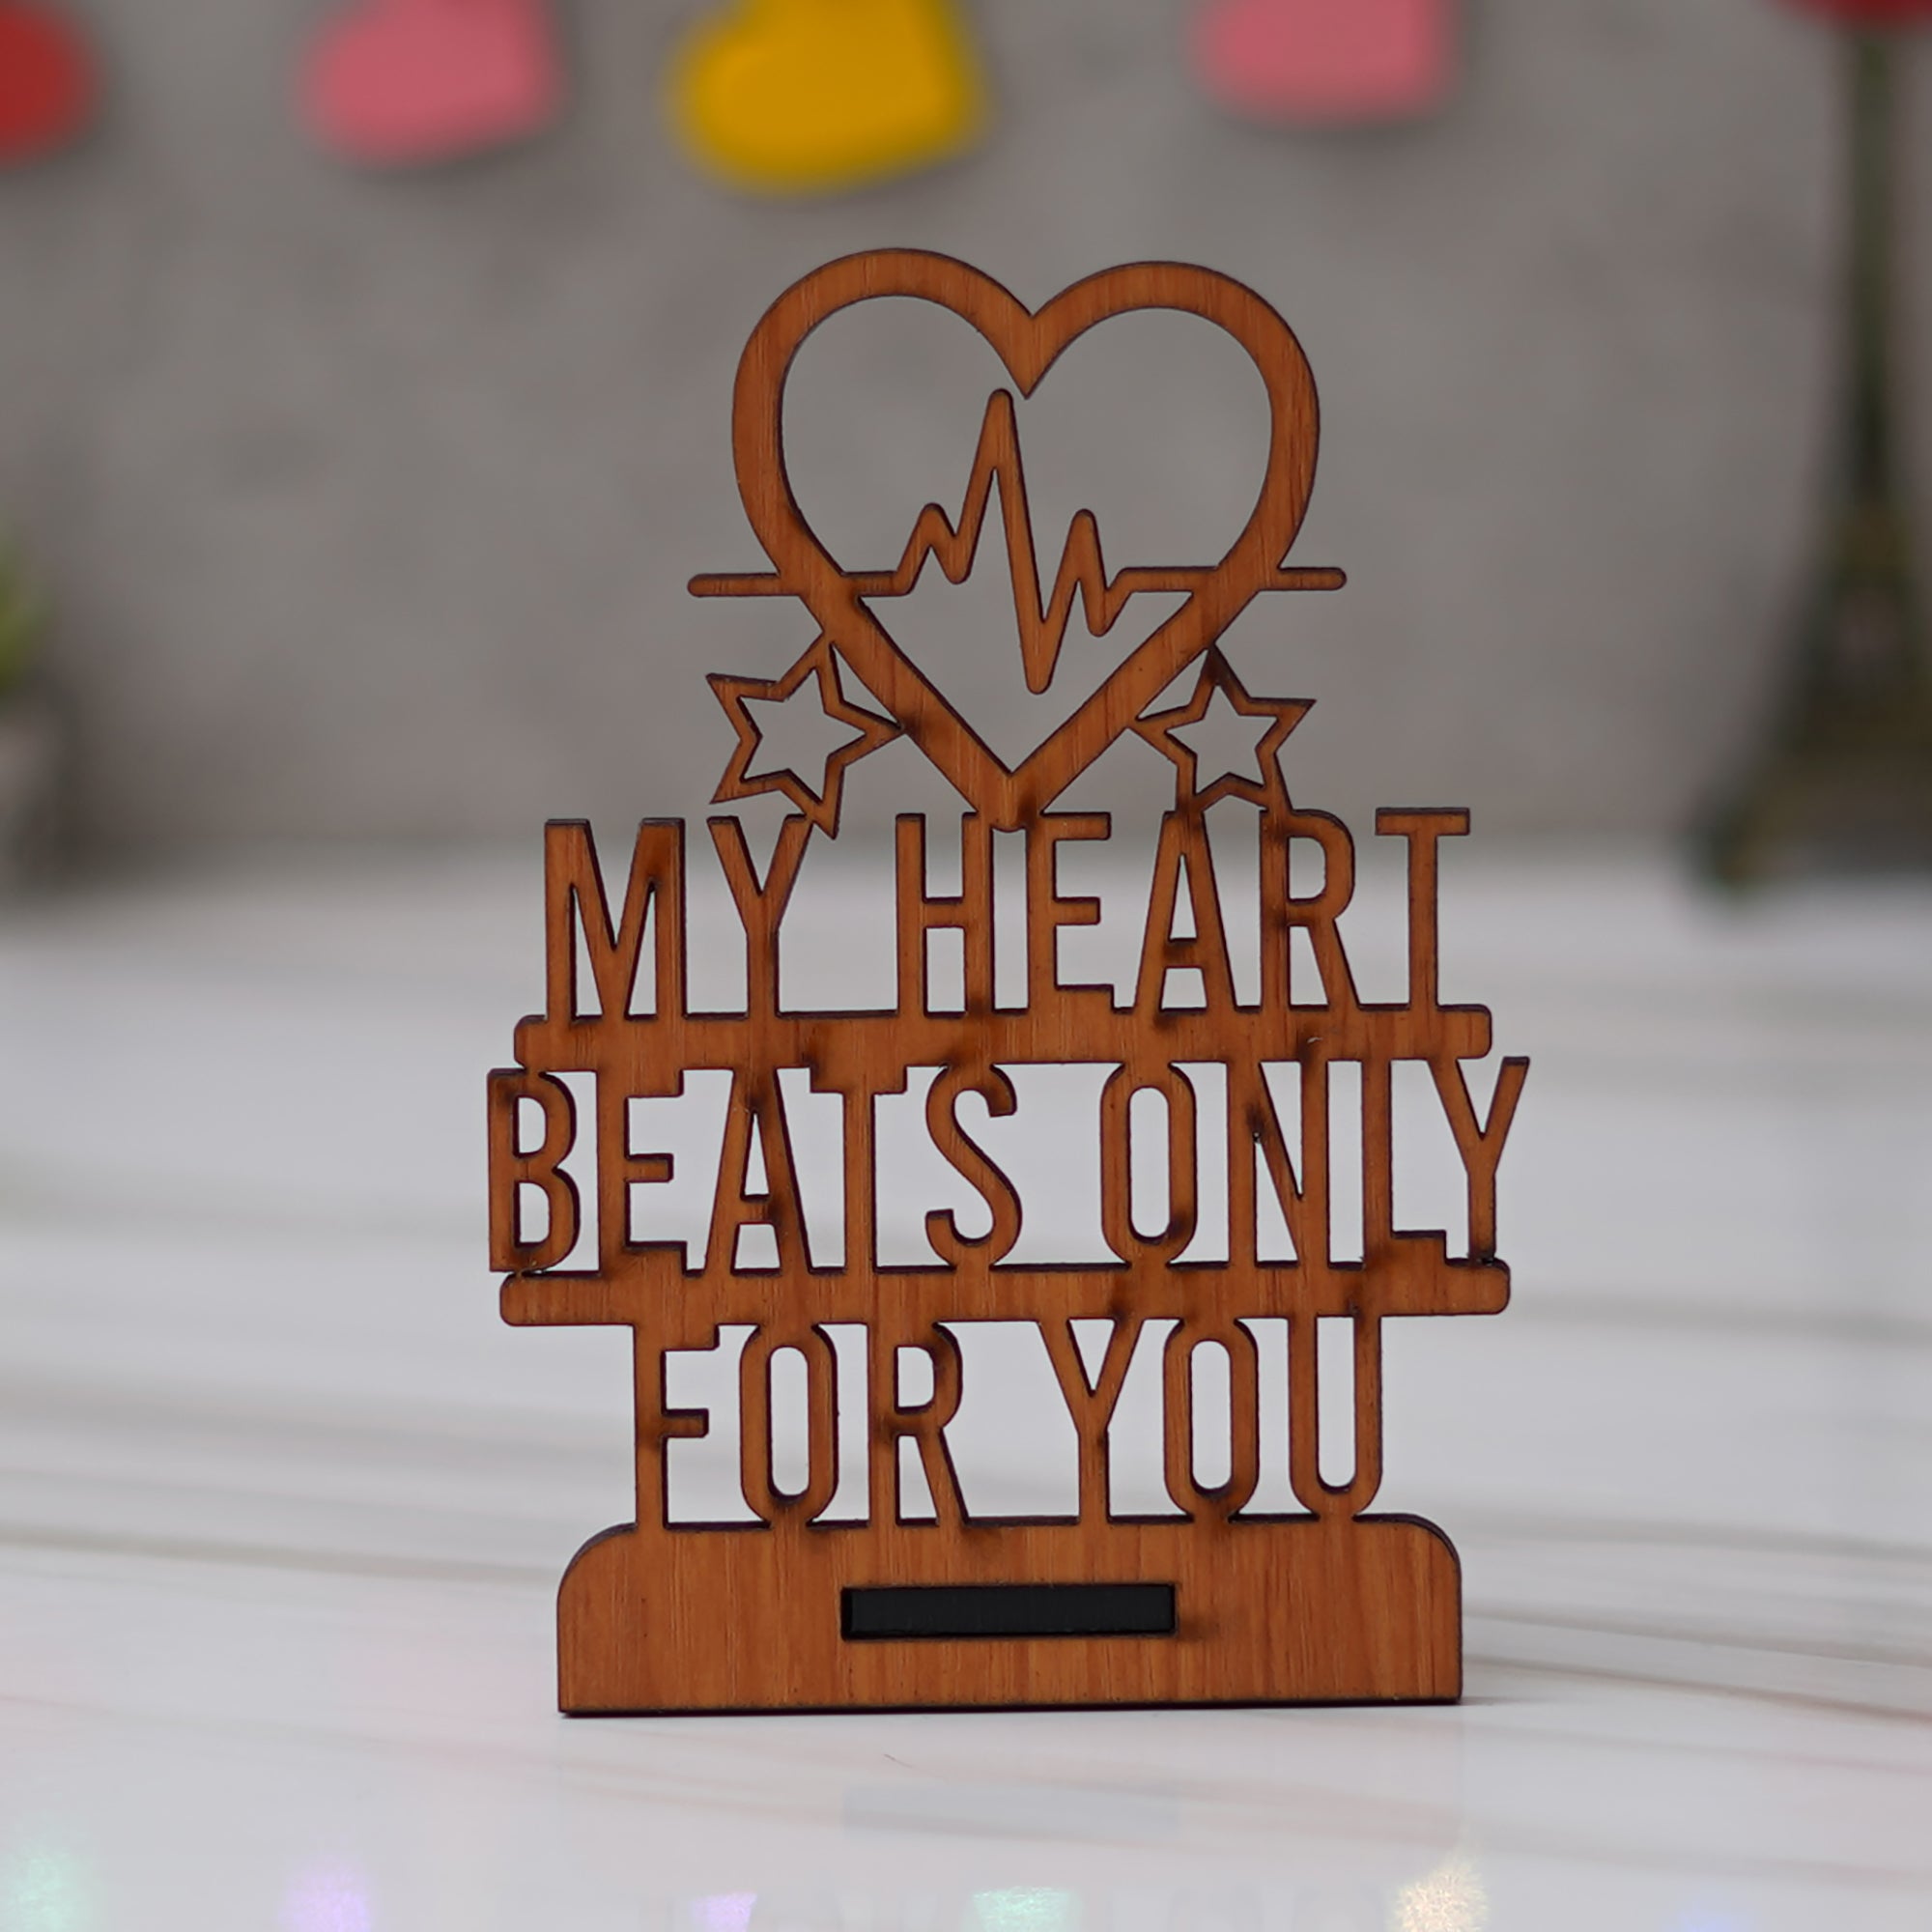 Valentine Combo of Set of 8 Love Post Cards Gift Cards Set, "My Heart Beats Only For You" Wooden Showpiece With Stand, Pink Heart Shaped Gift Box with Teddy and Roses 3